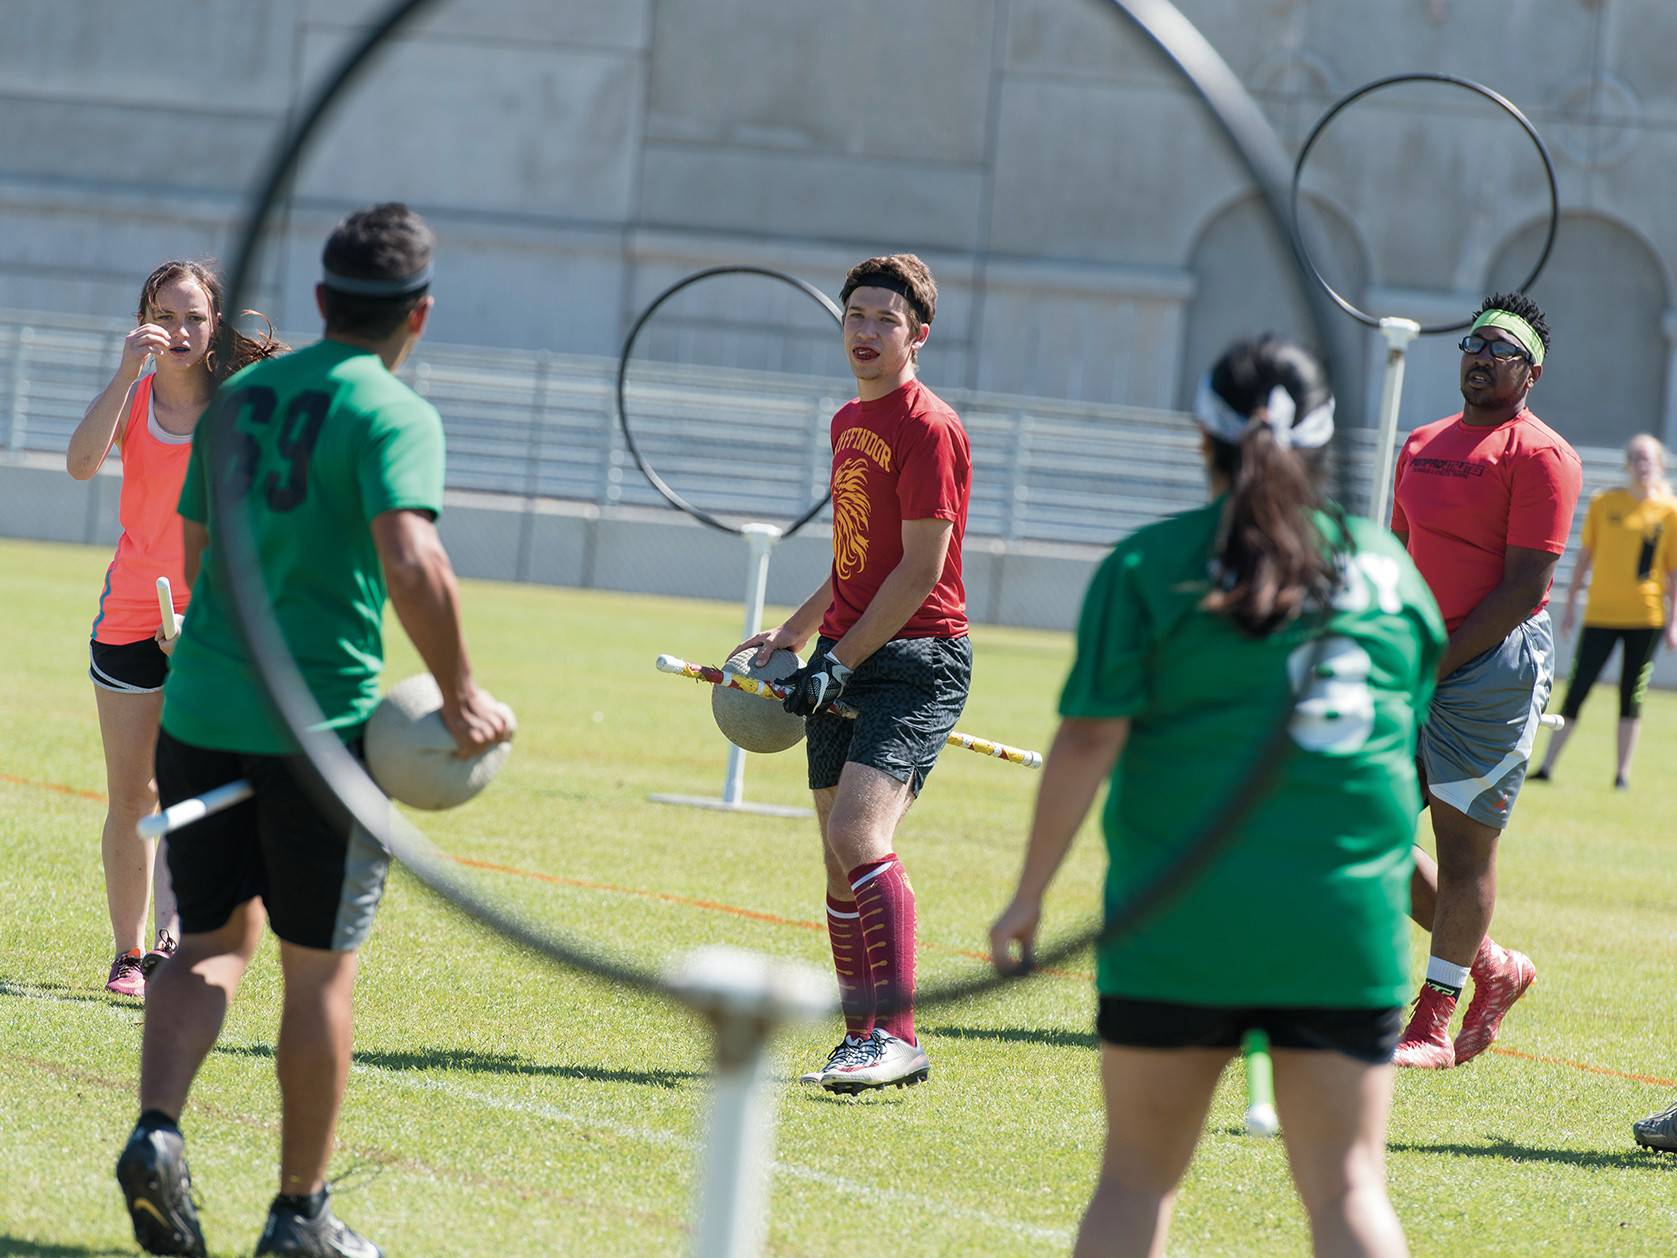 Quidditch players on field